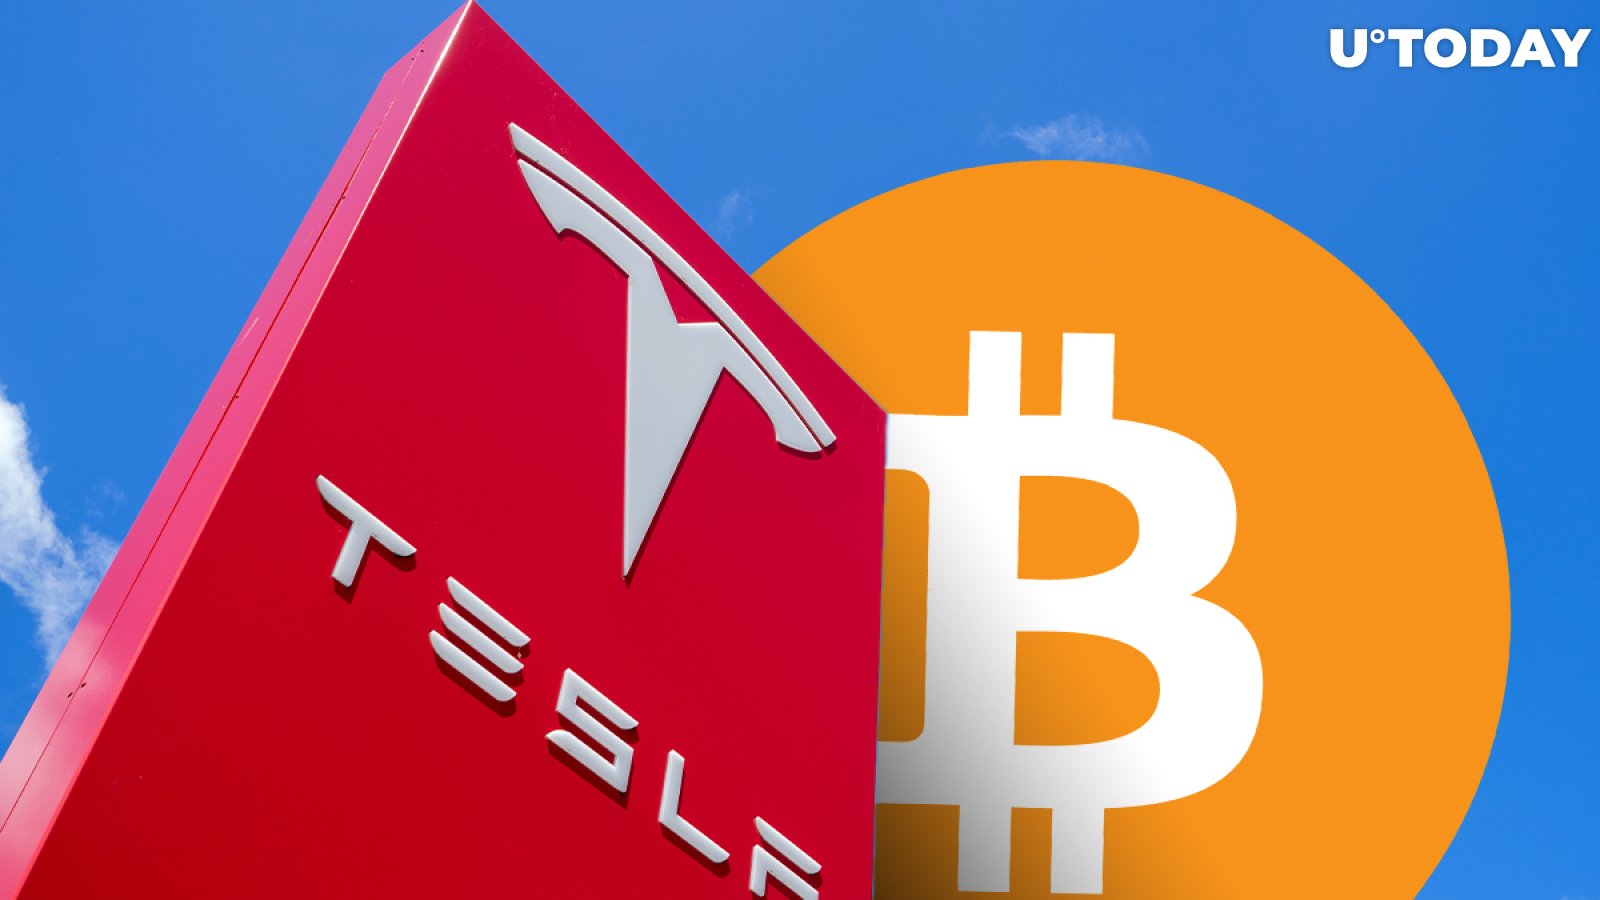 Tesla Speculators Likely to Flock to Bitcoin Once Its Price Breaks Above $20,000: Economist